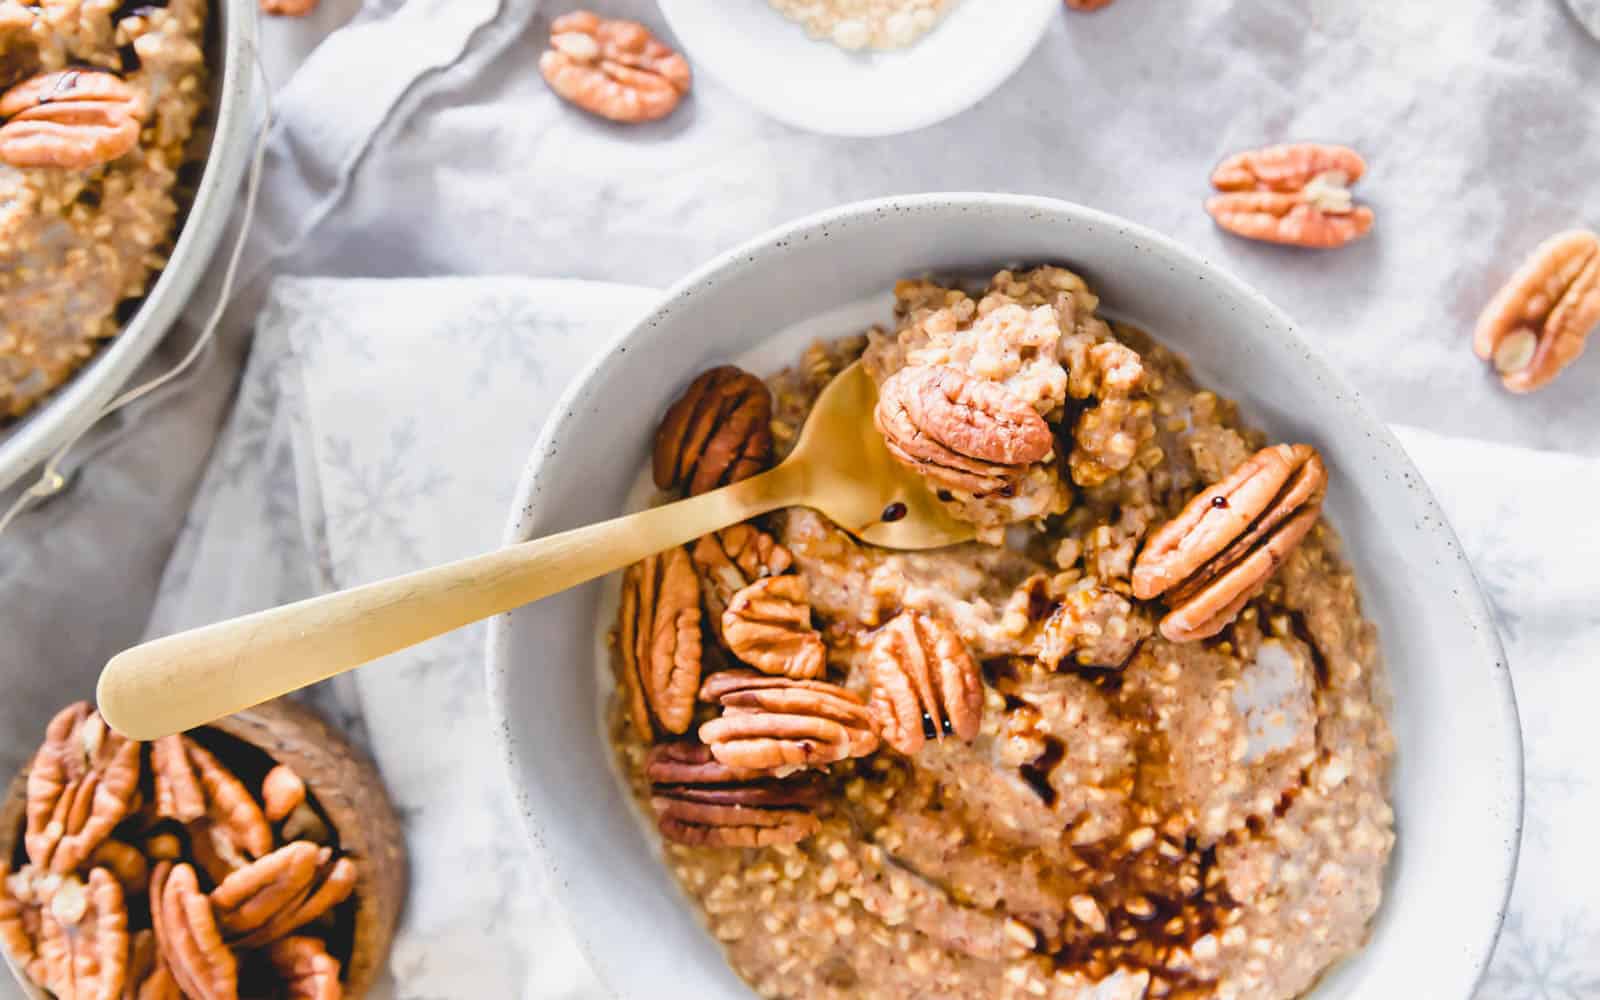 Gingerbread molasses oatmeal topped with pecans.